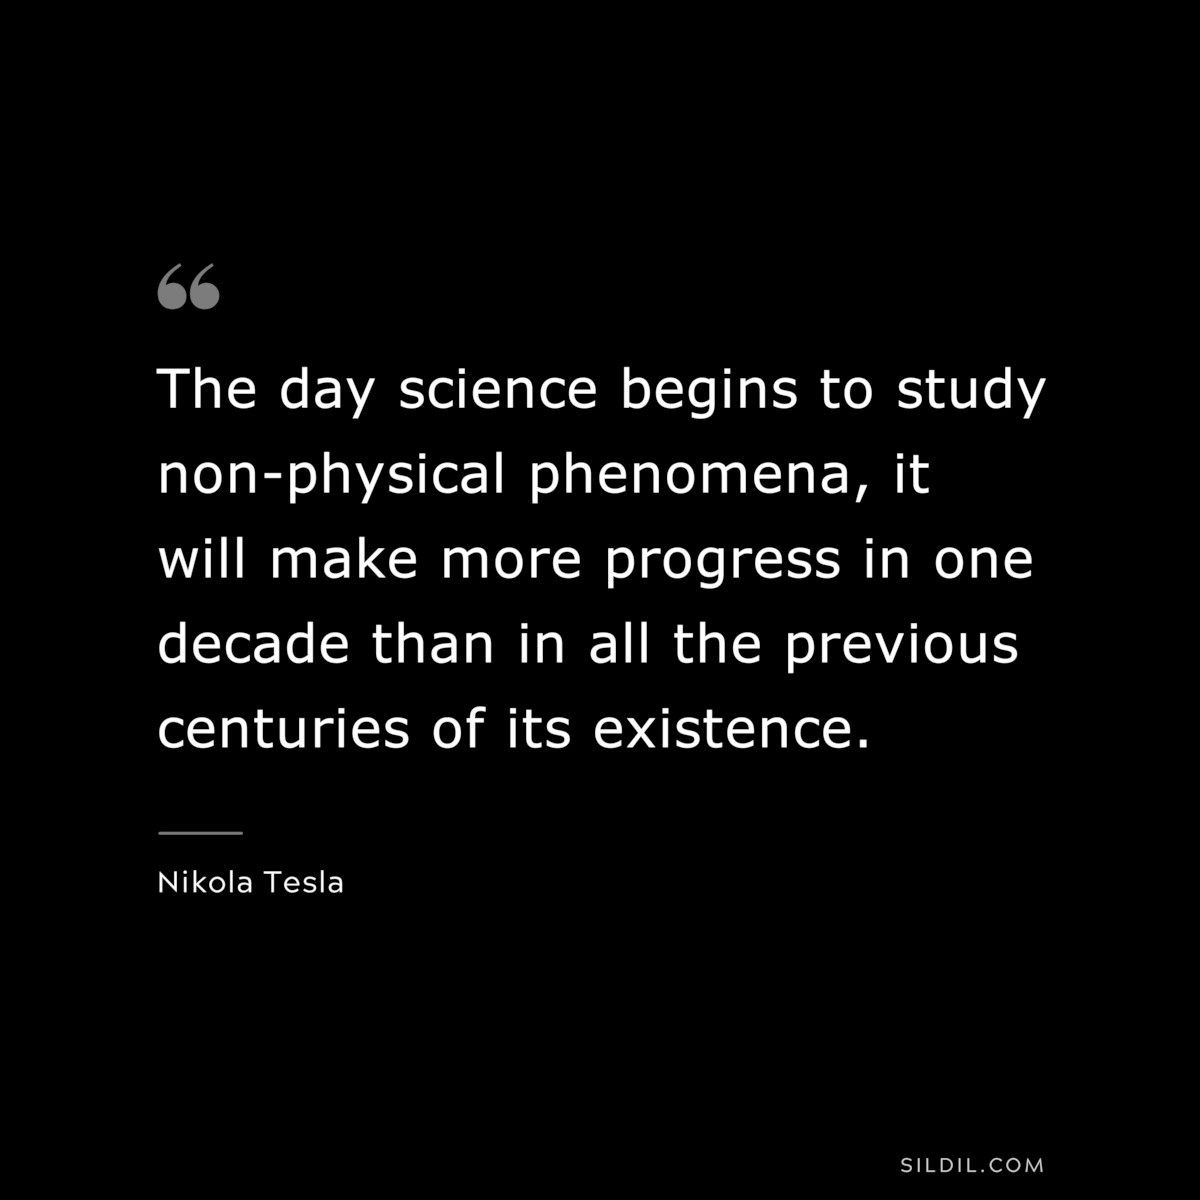 The day science begins to study non-physical phenomena, it will make more progress in one decade than in all the previous centuries of its existence. ― Nikola Tesla